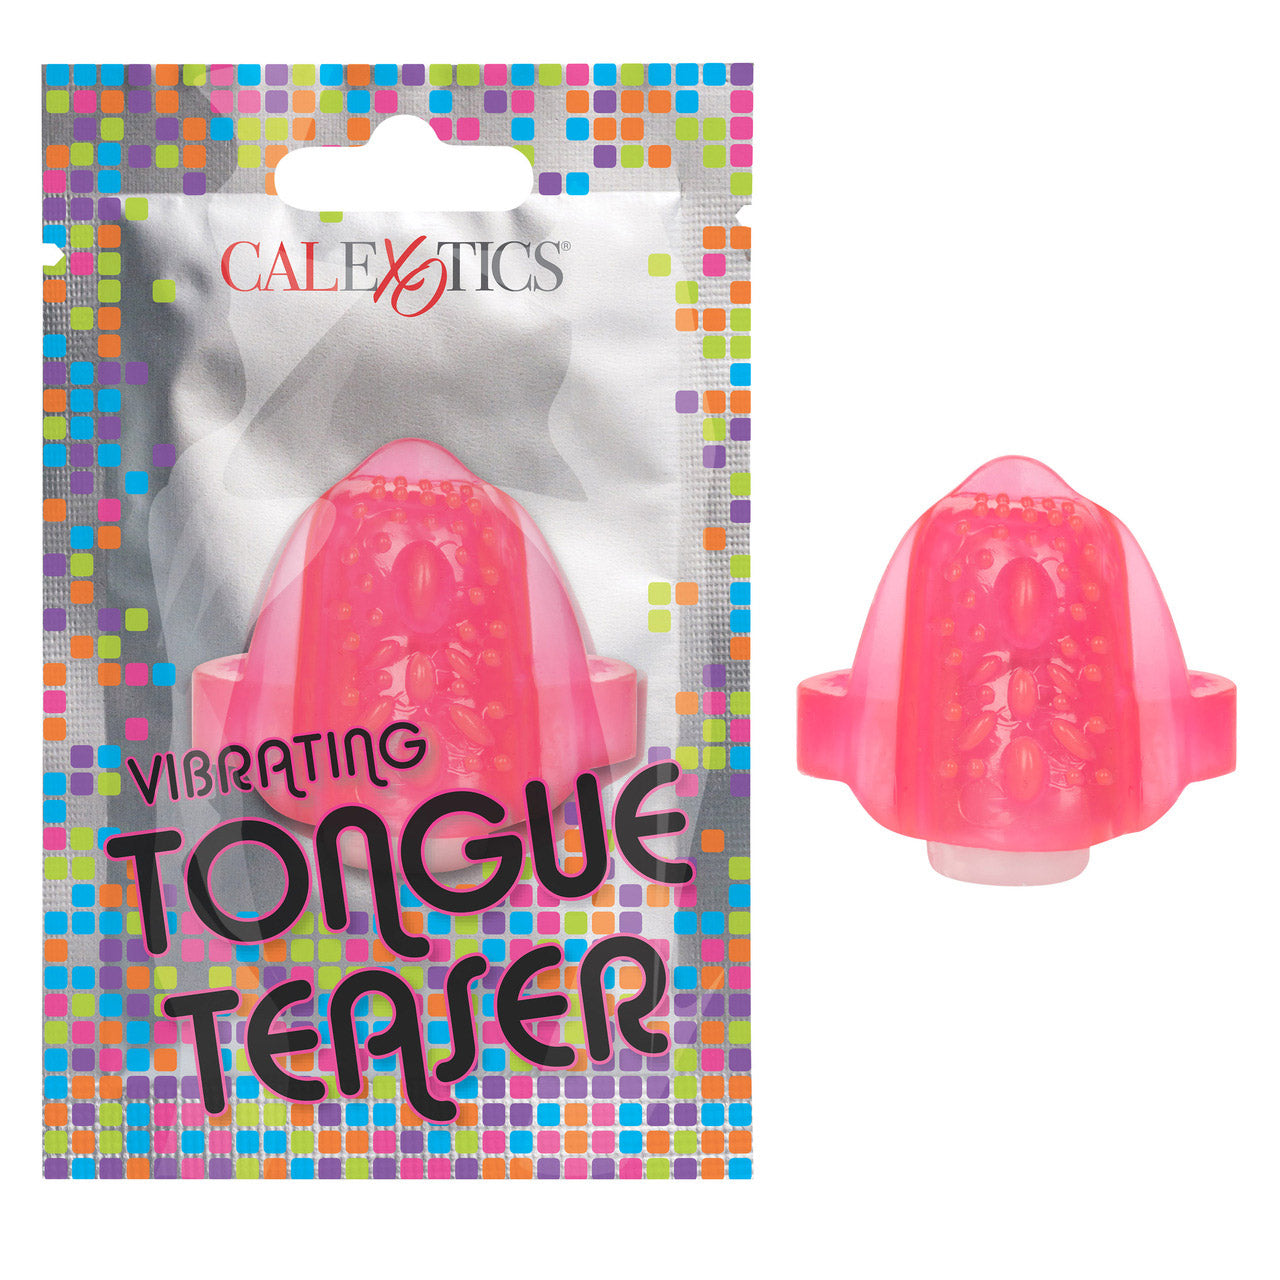 Foil Pack Vibrating Tongue Teaser - Pink - Thorn & Feather Sex Toy Canada